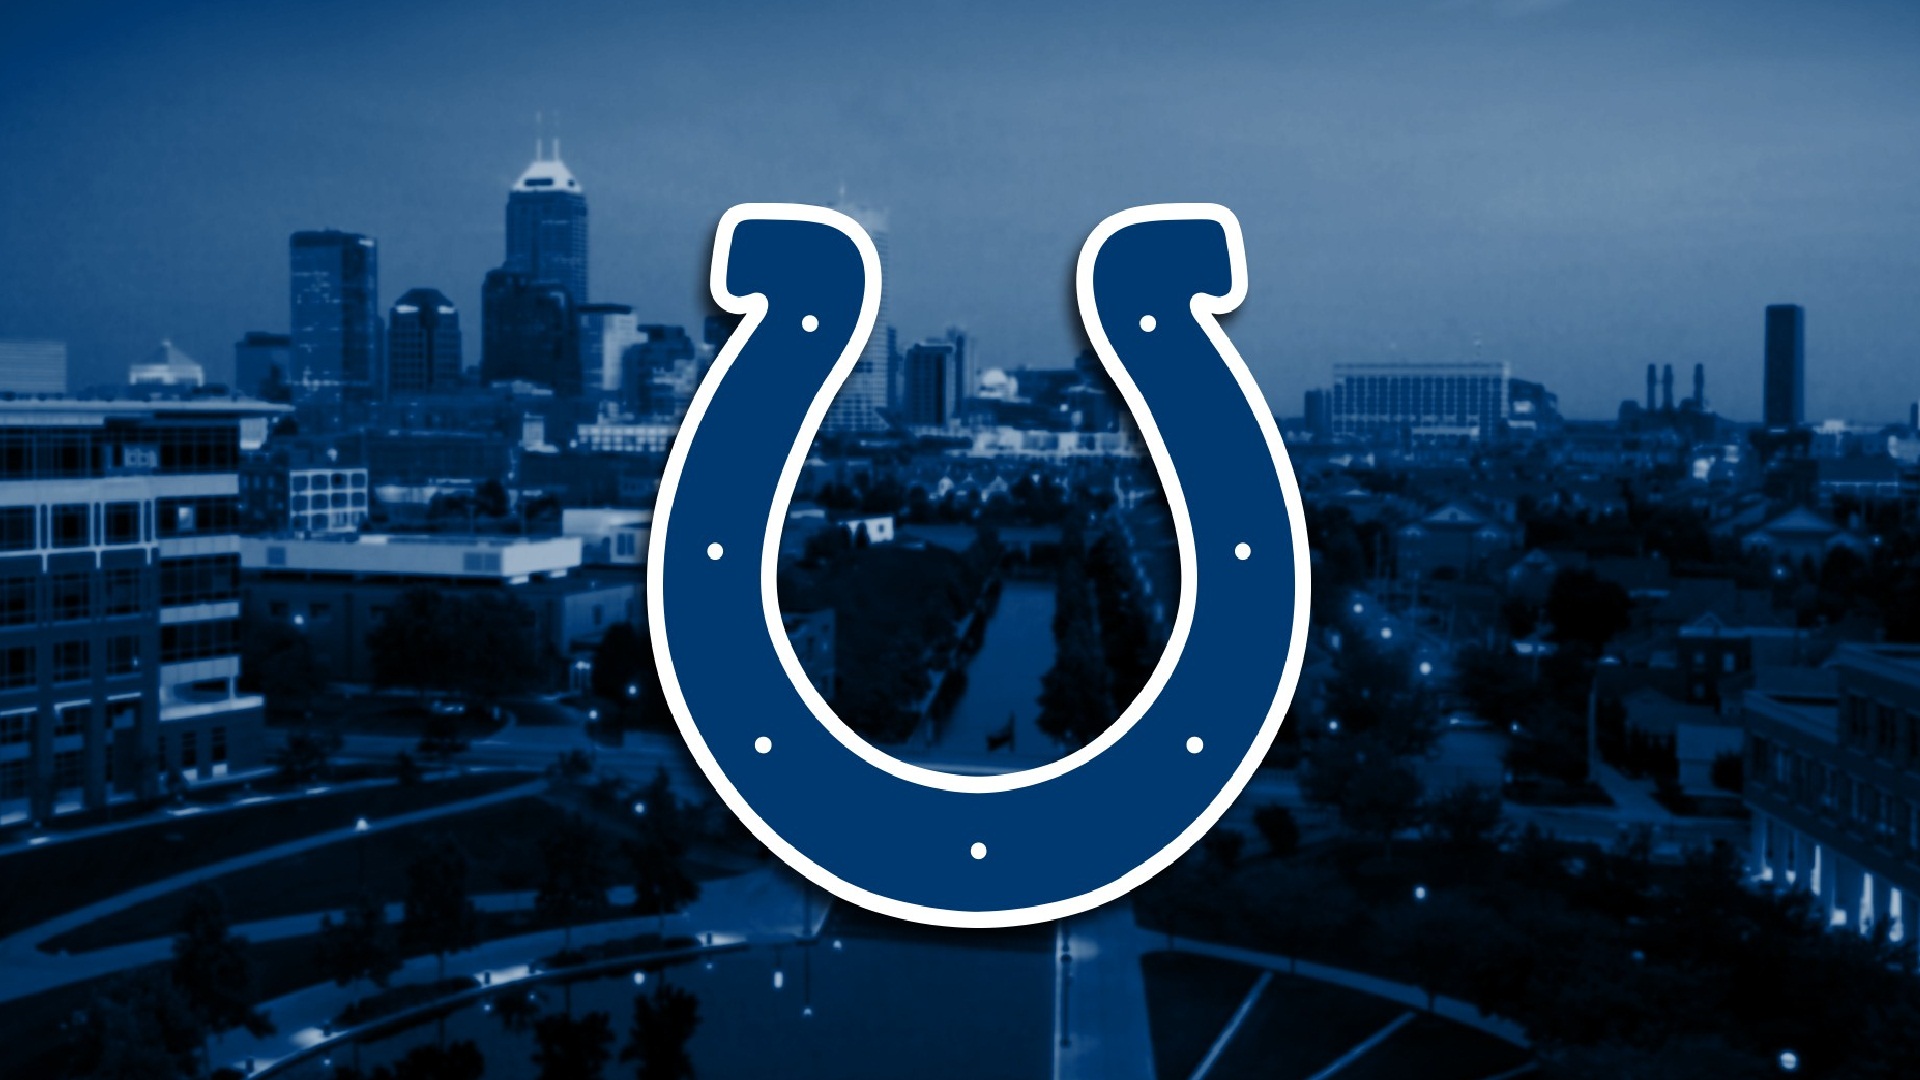 Wallpapers Indianapolis Colts Nfl With Resolution Pixel - Indianapolis Colts - HD Wallpaper 